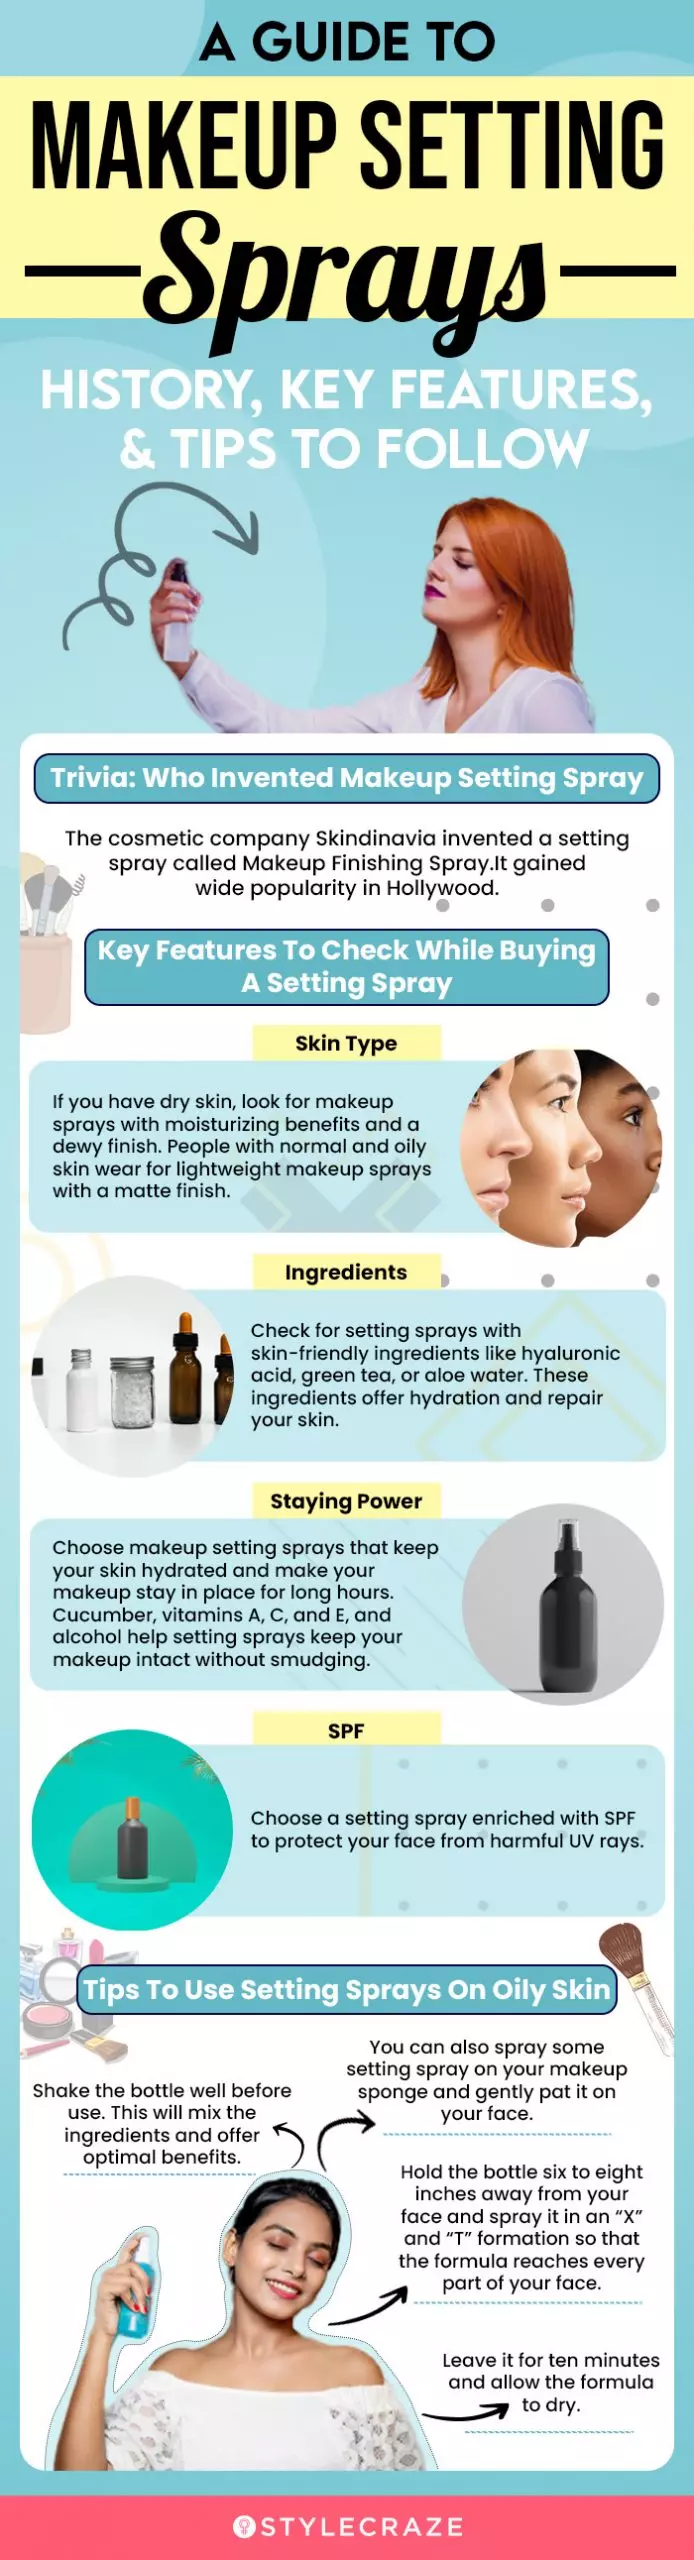 A Guide To Makeup Setting Sprays (infographic)